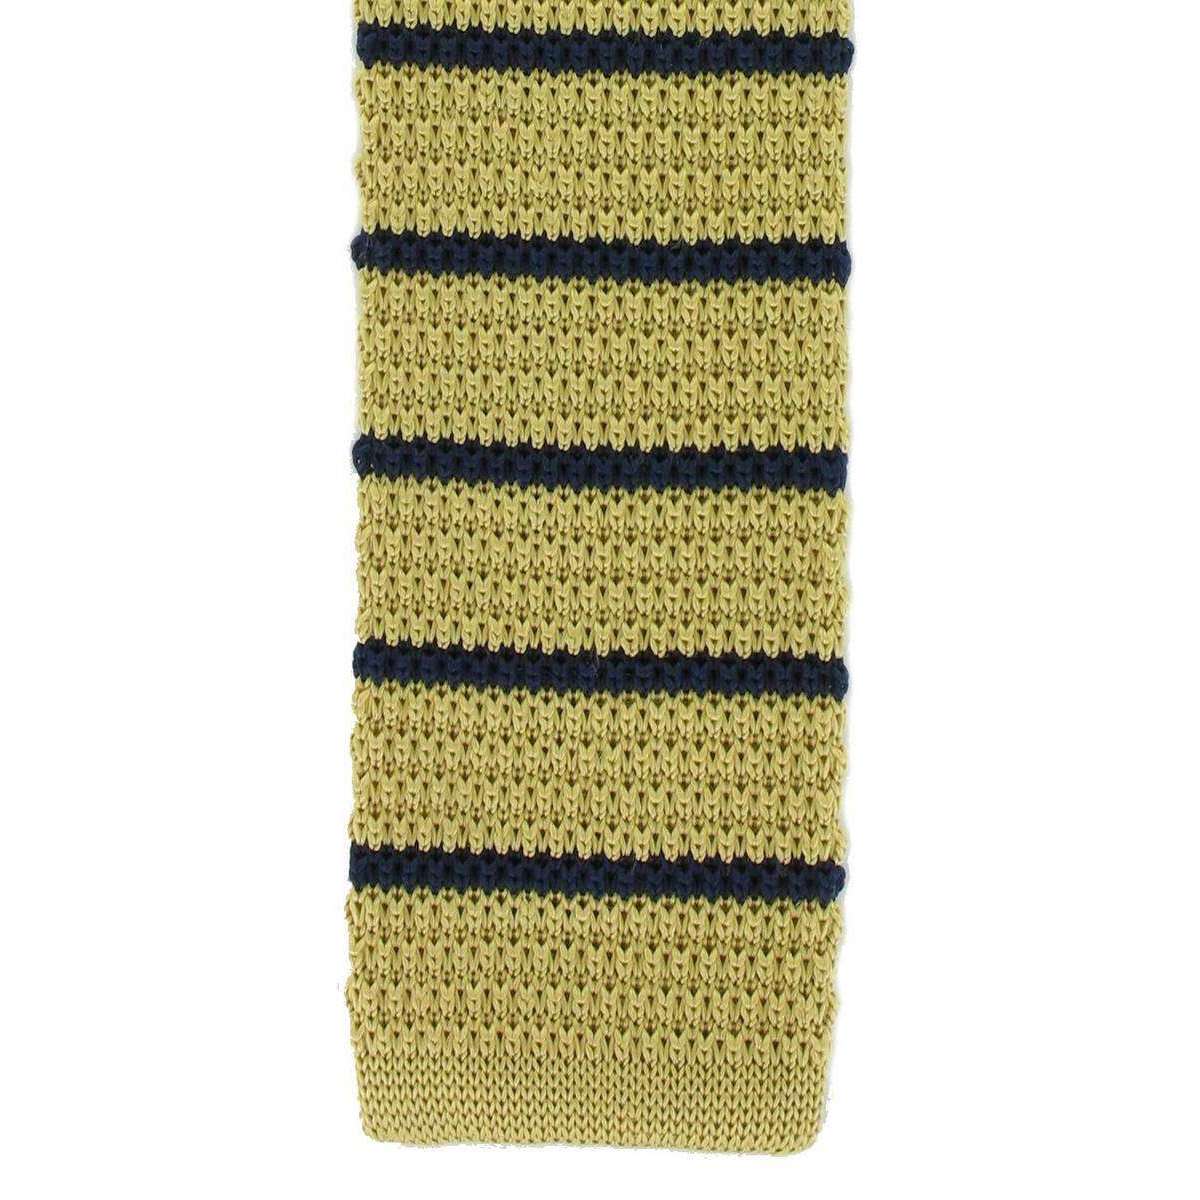 Michelsons of London Silk Knitted Striped Skinny Tie - Yellow/Navy